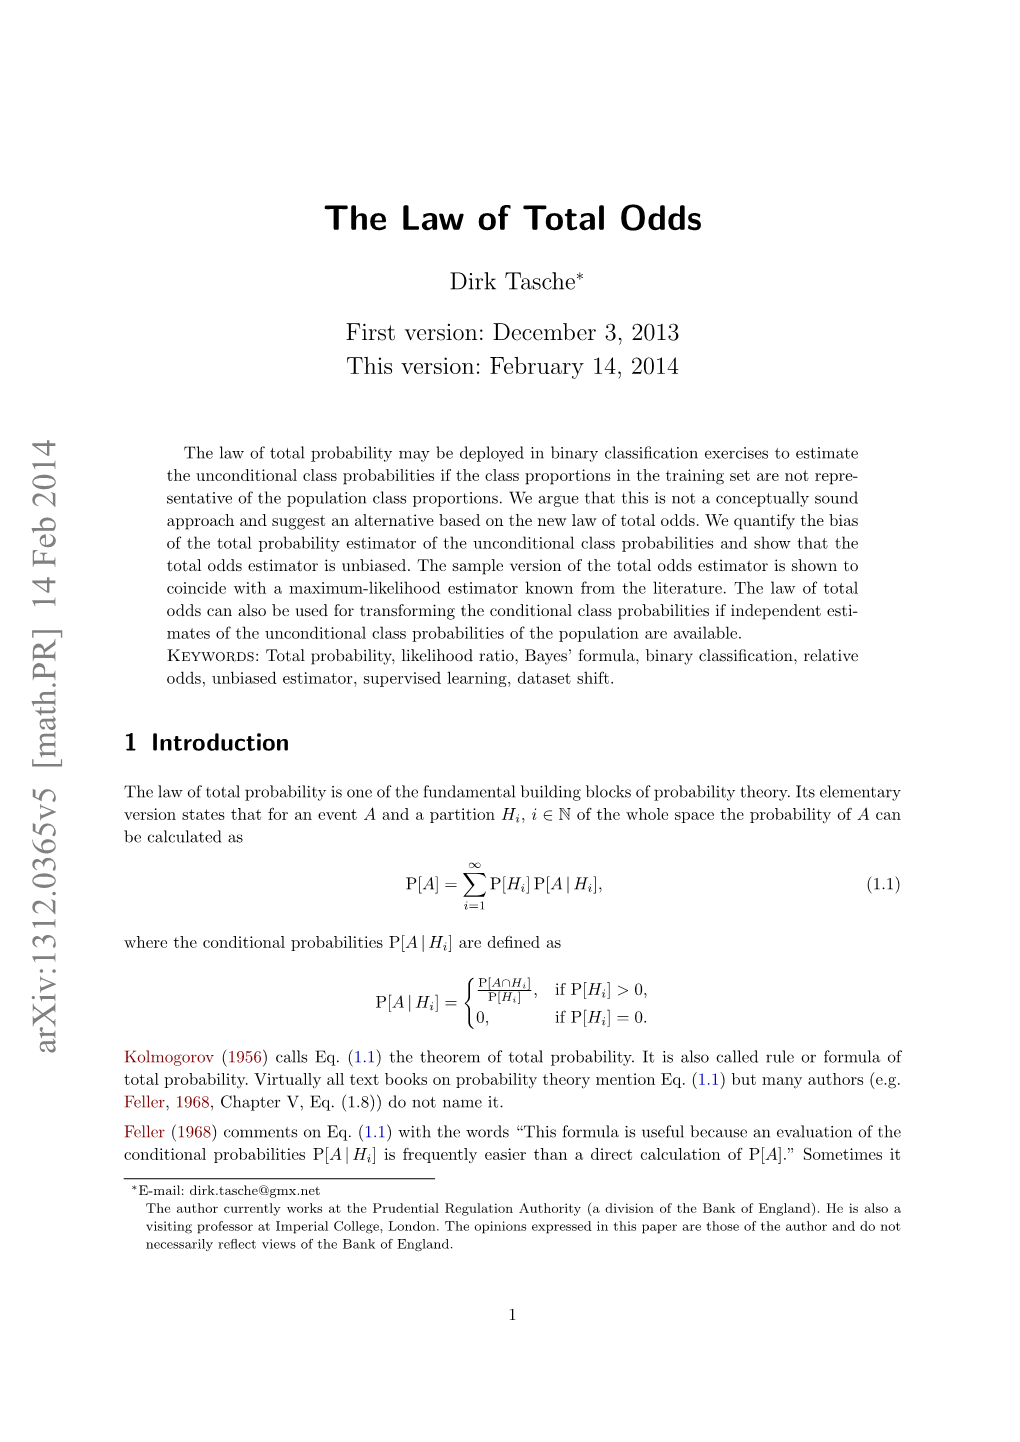 The Law of Total Odds